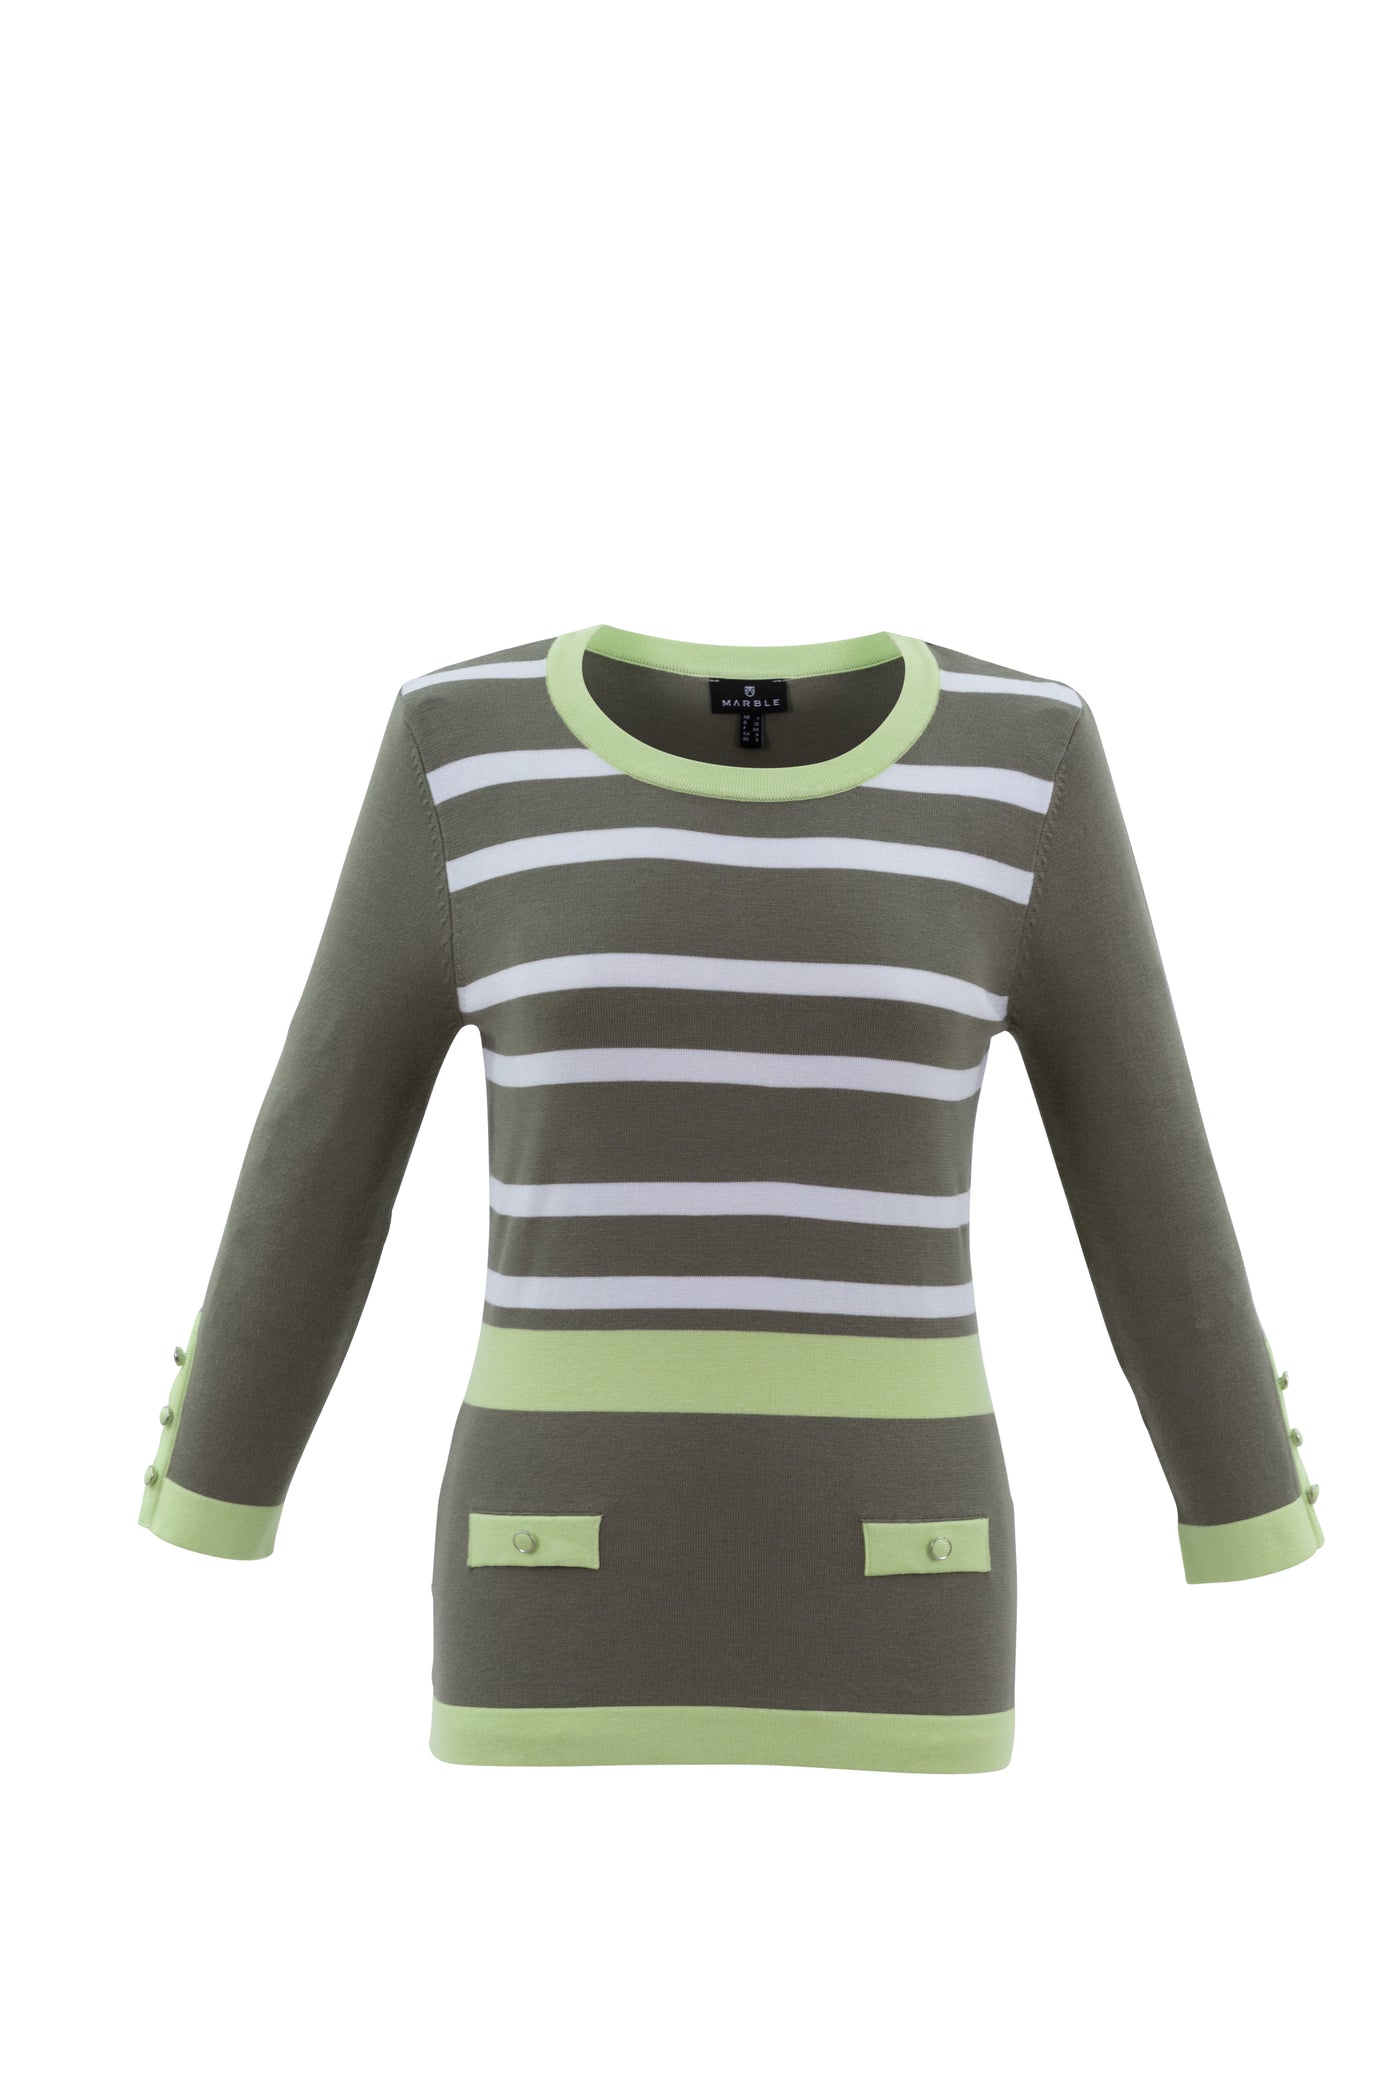 Khaki/Lime/White Stripe Jumper With Buttons